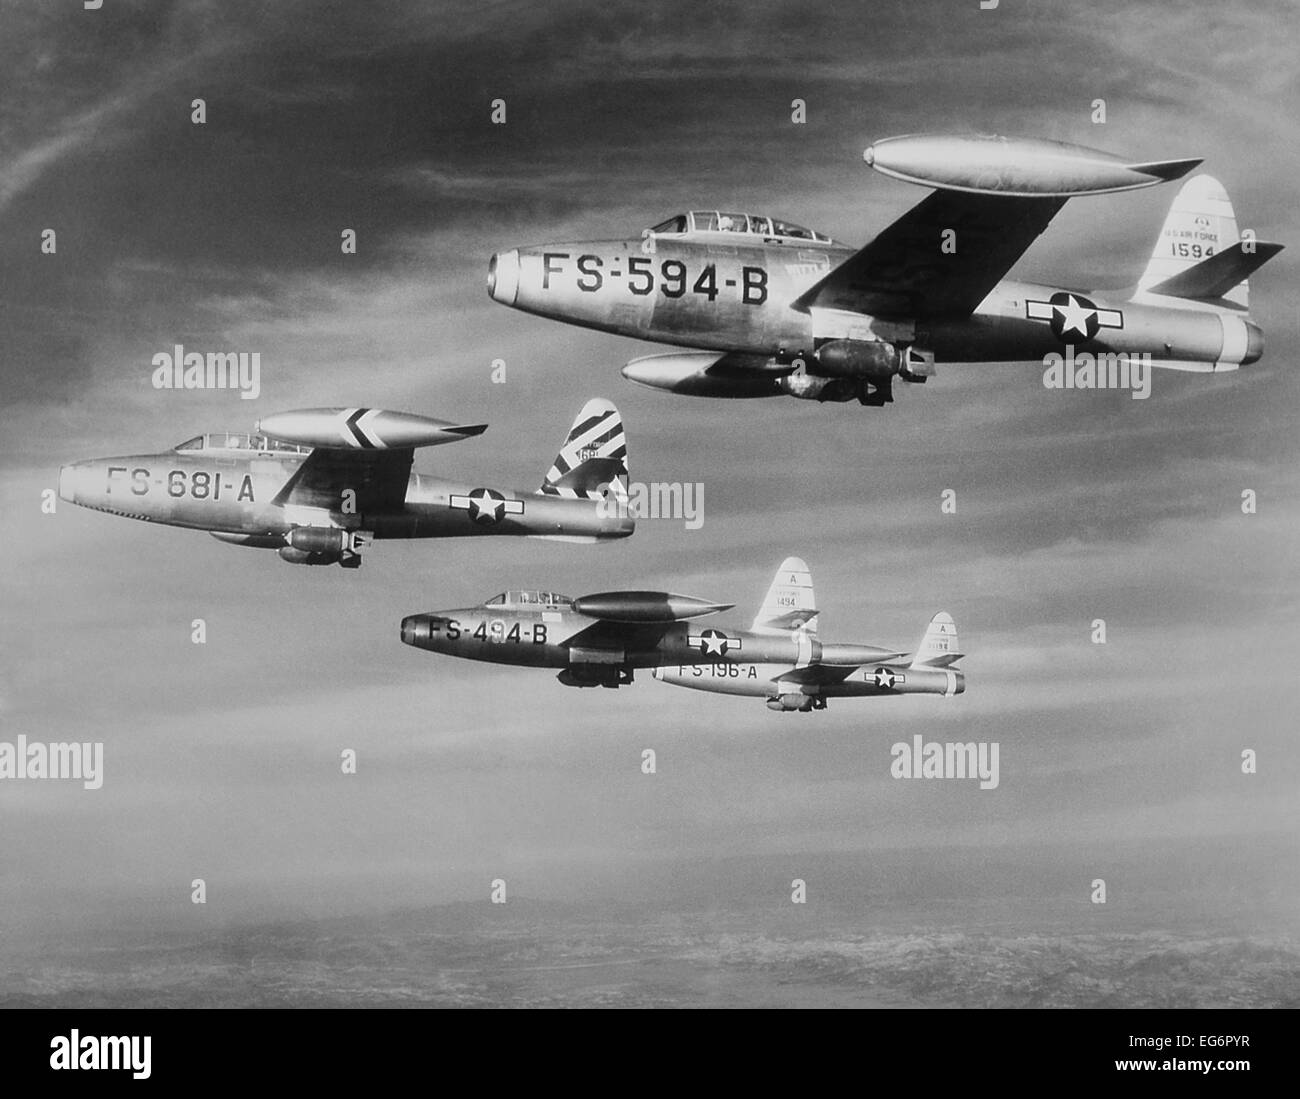 U.S. F-84 Thunderjets on bombing mission north of the 38th parallel during the Korean War. Ca. 1950-53.. (BSLOC 2014 11 227) Stock Photo